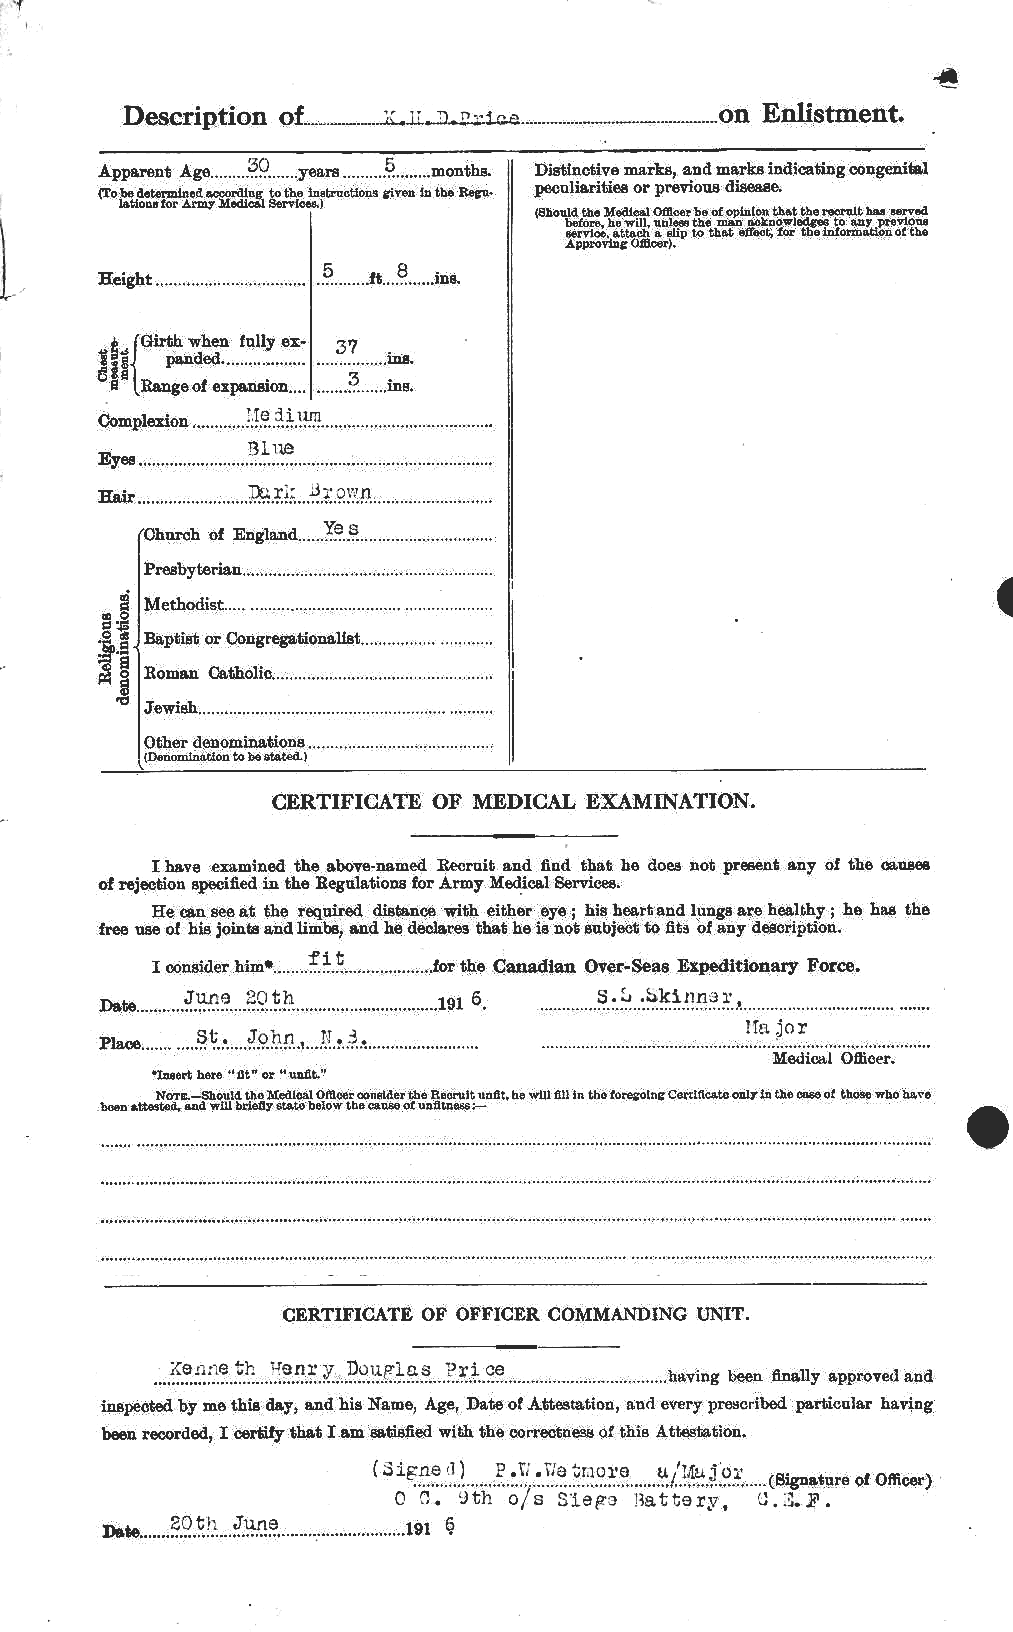 Personnel Records of the First World War - CEF 587271b